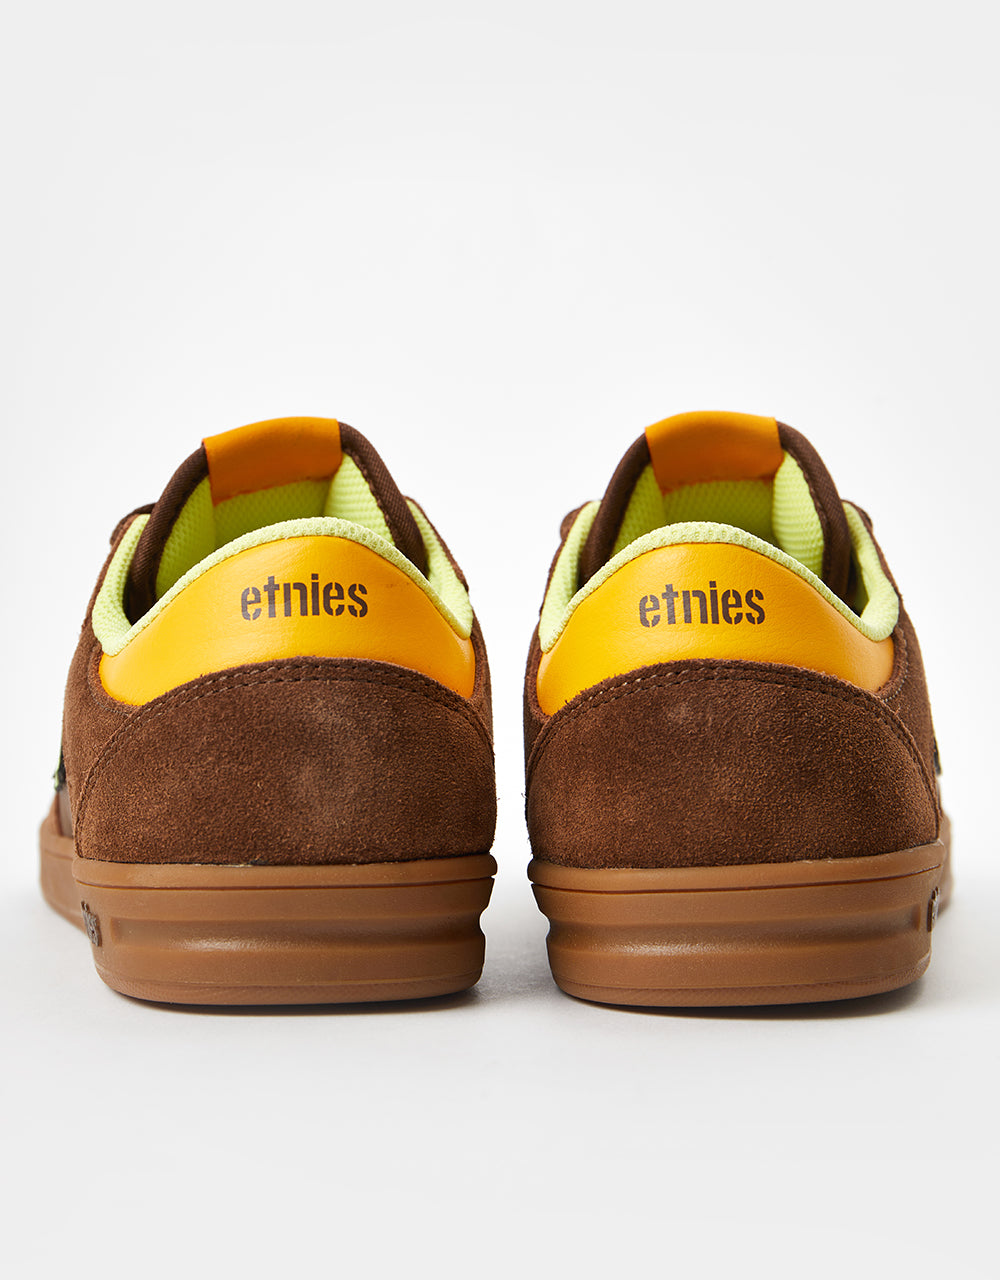 Etnies Windrow Skate Shoes - Brown/Gum